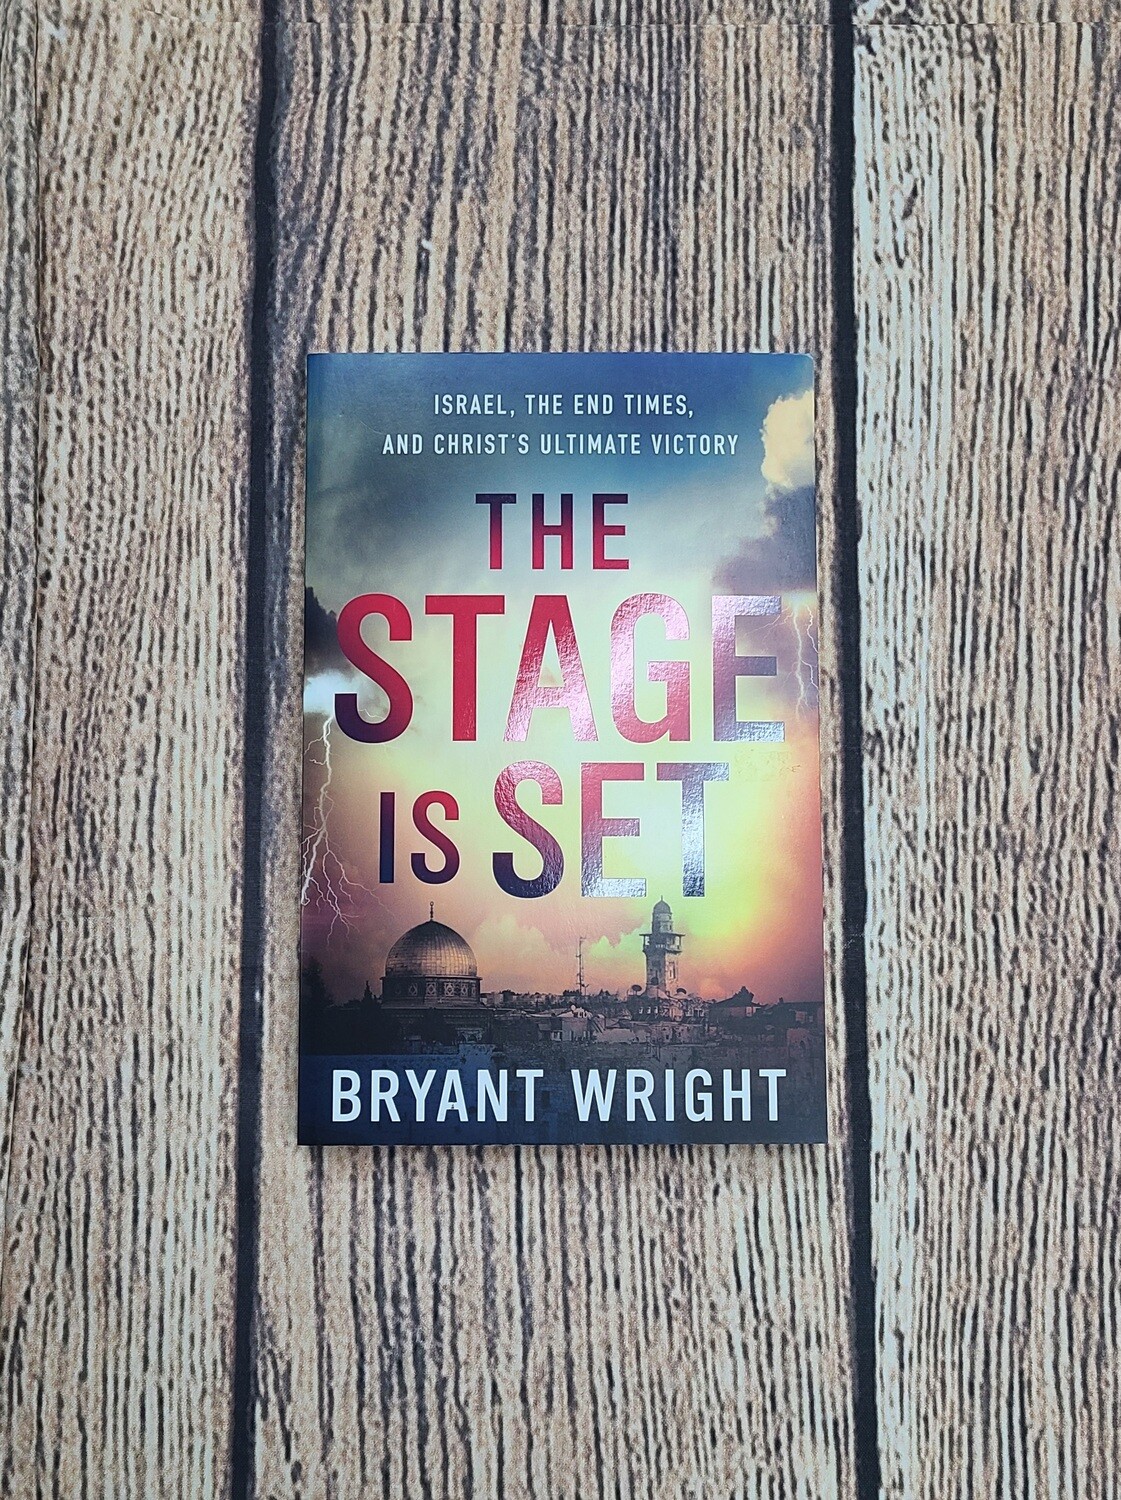 The Stage is Set by Bryant Wright